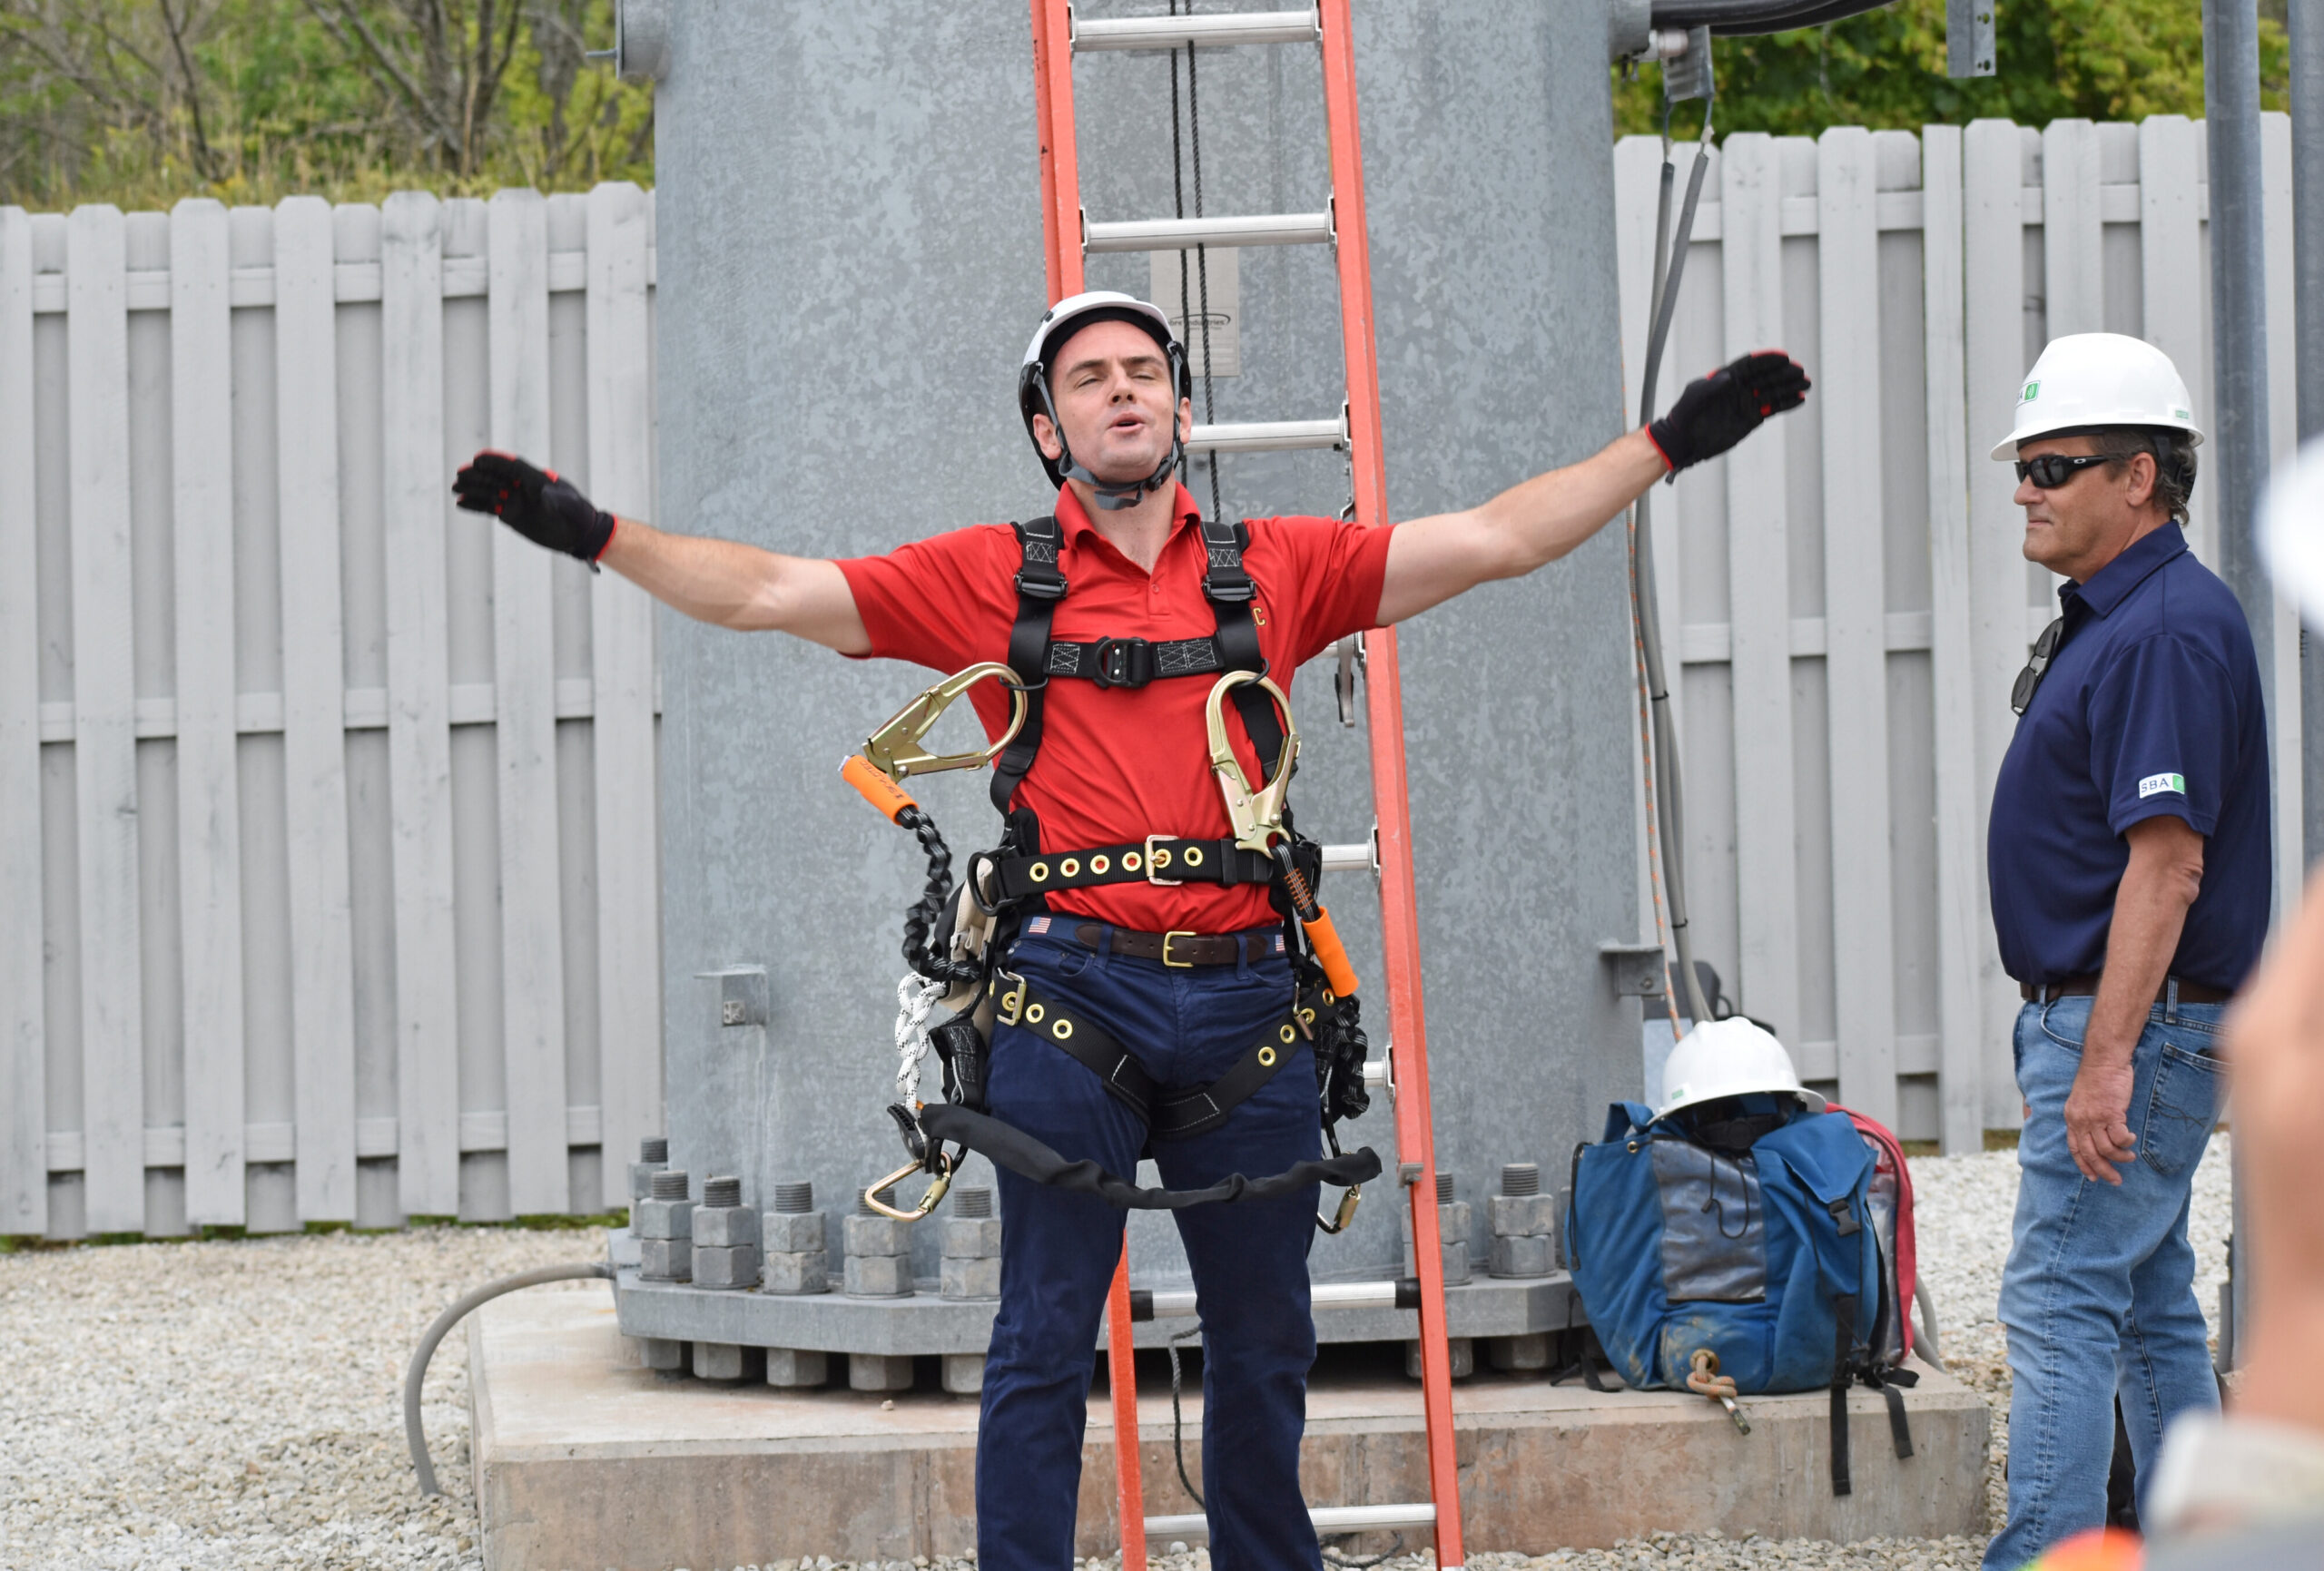 Mike Gallagher celebrates after climbing a cell tower